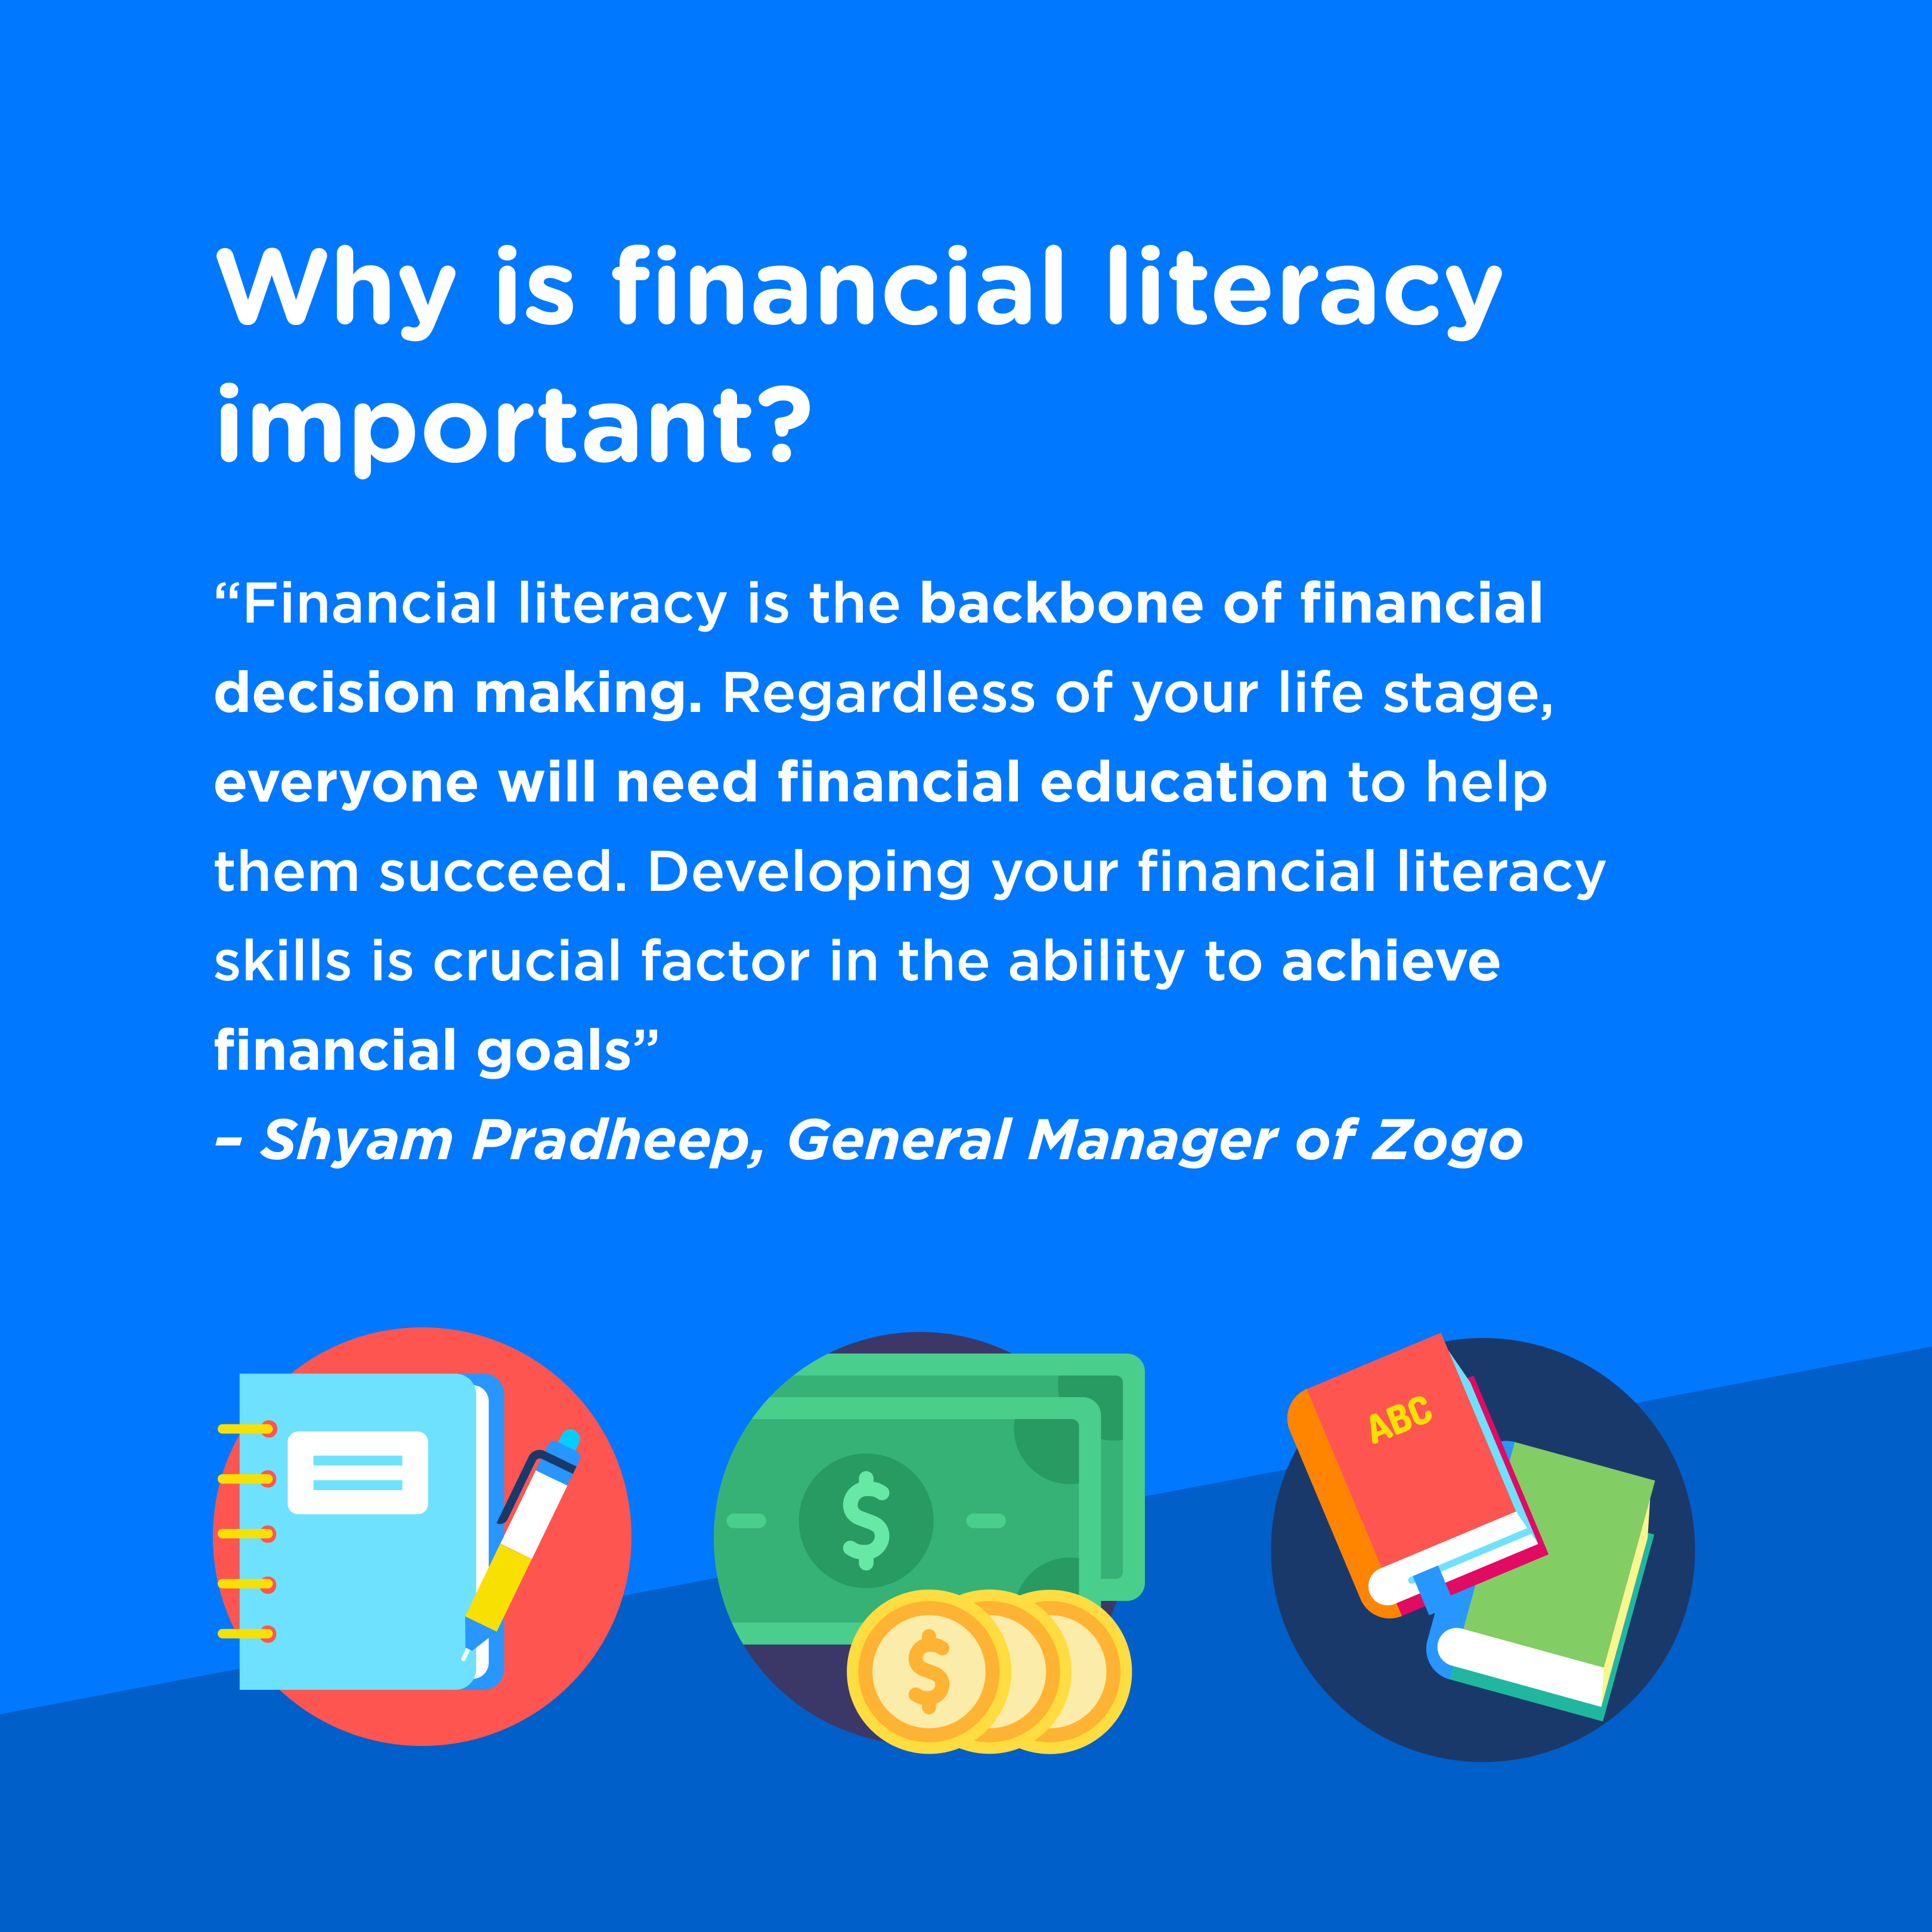 Blue background with cartoon images of notebook, money and books. Copy talks about what financial literacy is and why it is important. 